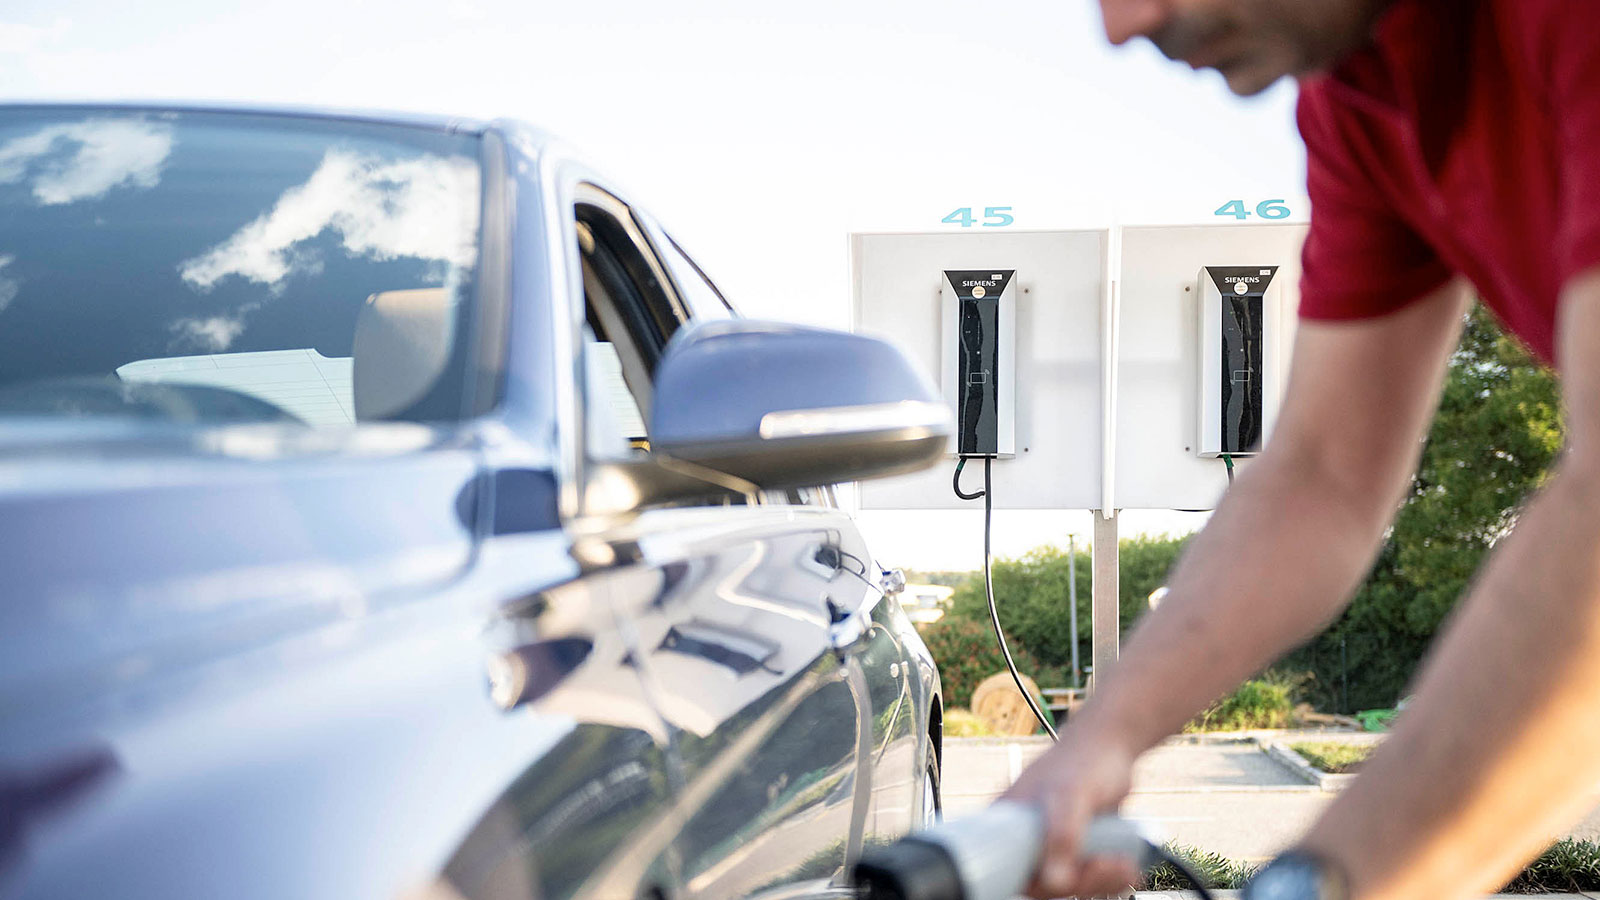 Toby Horne, Siemens Infrastructure Financing Partner at Siemens Financial Services UK, explores how private financing could supercharge the roll-out of EV charging infrastructure.